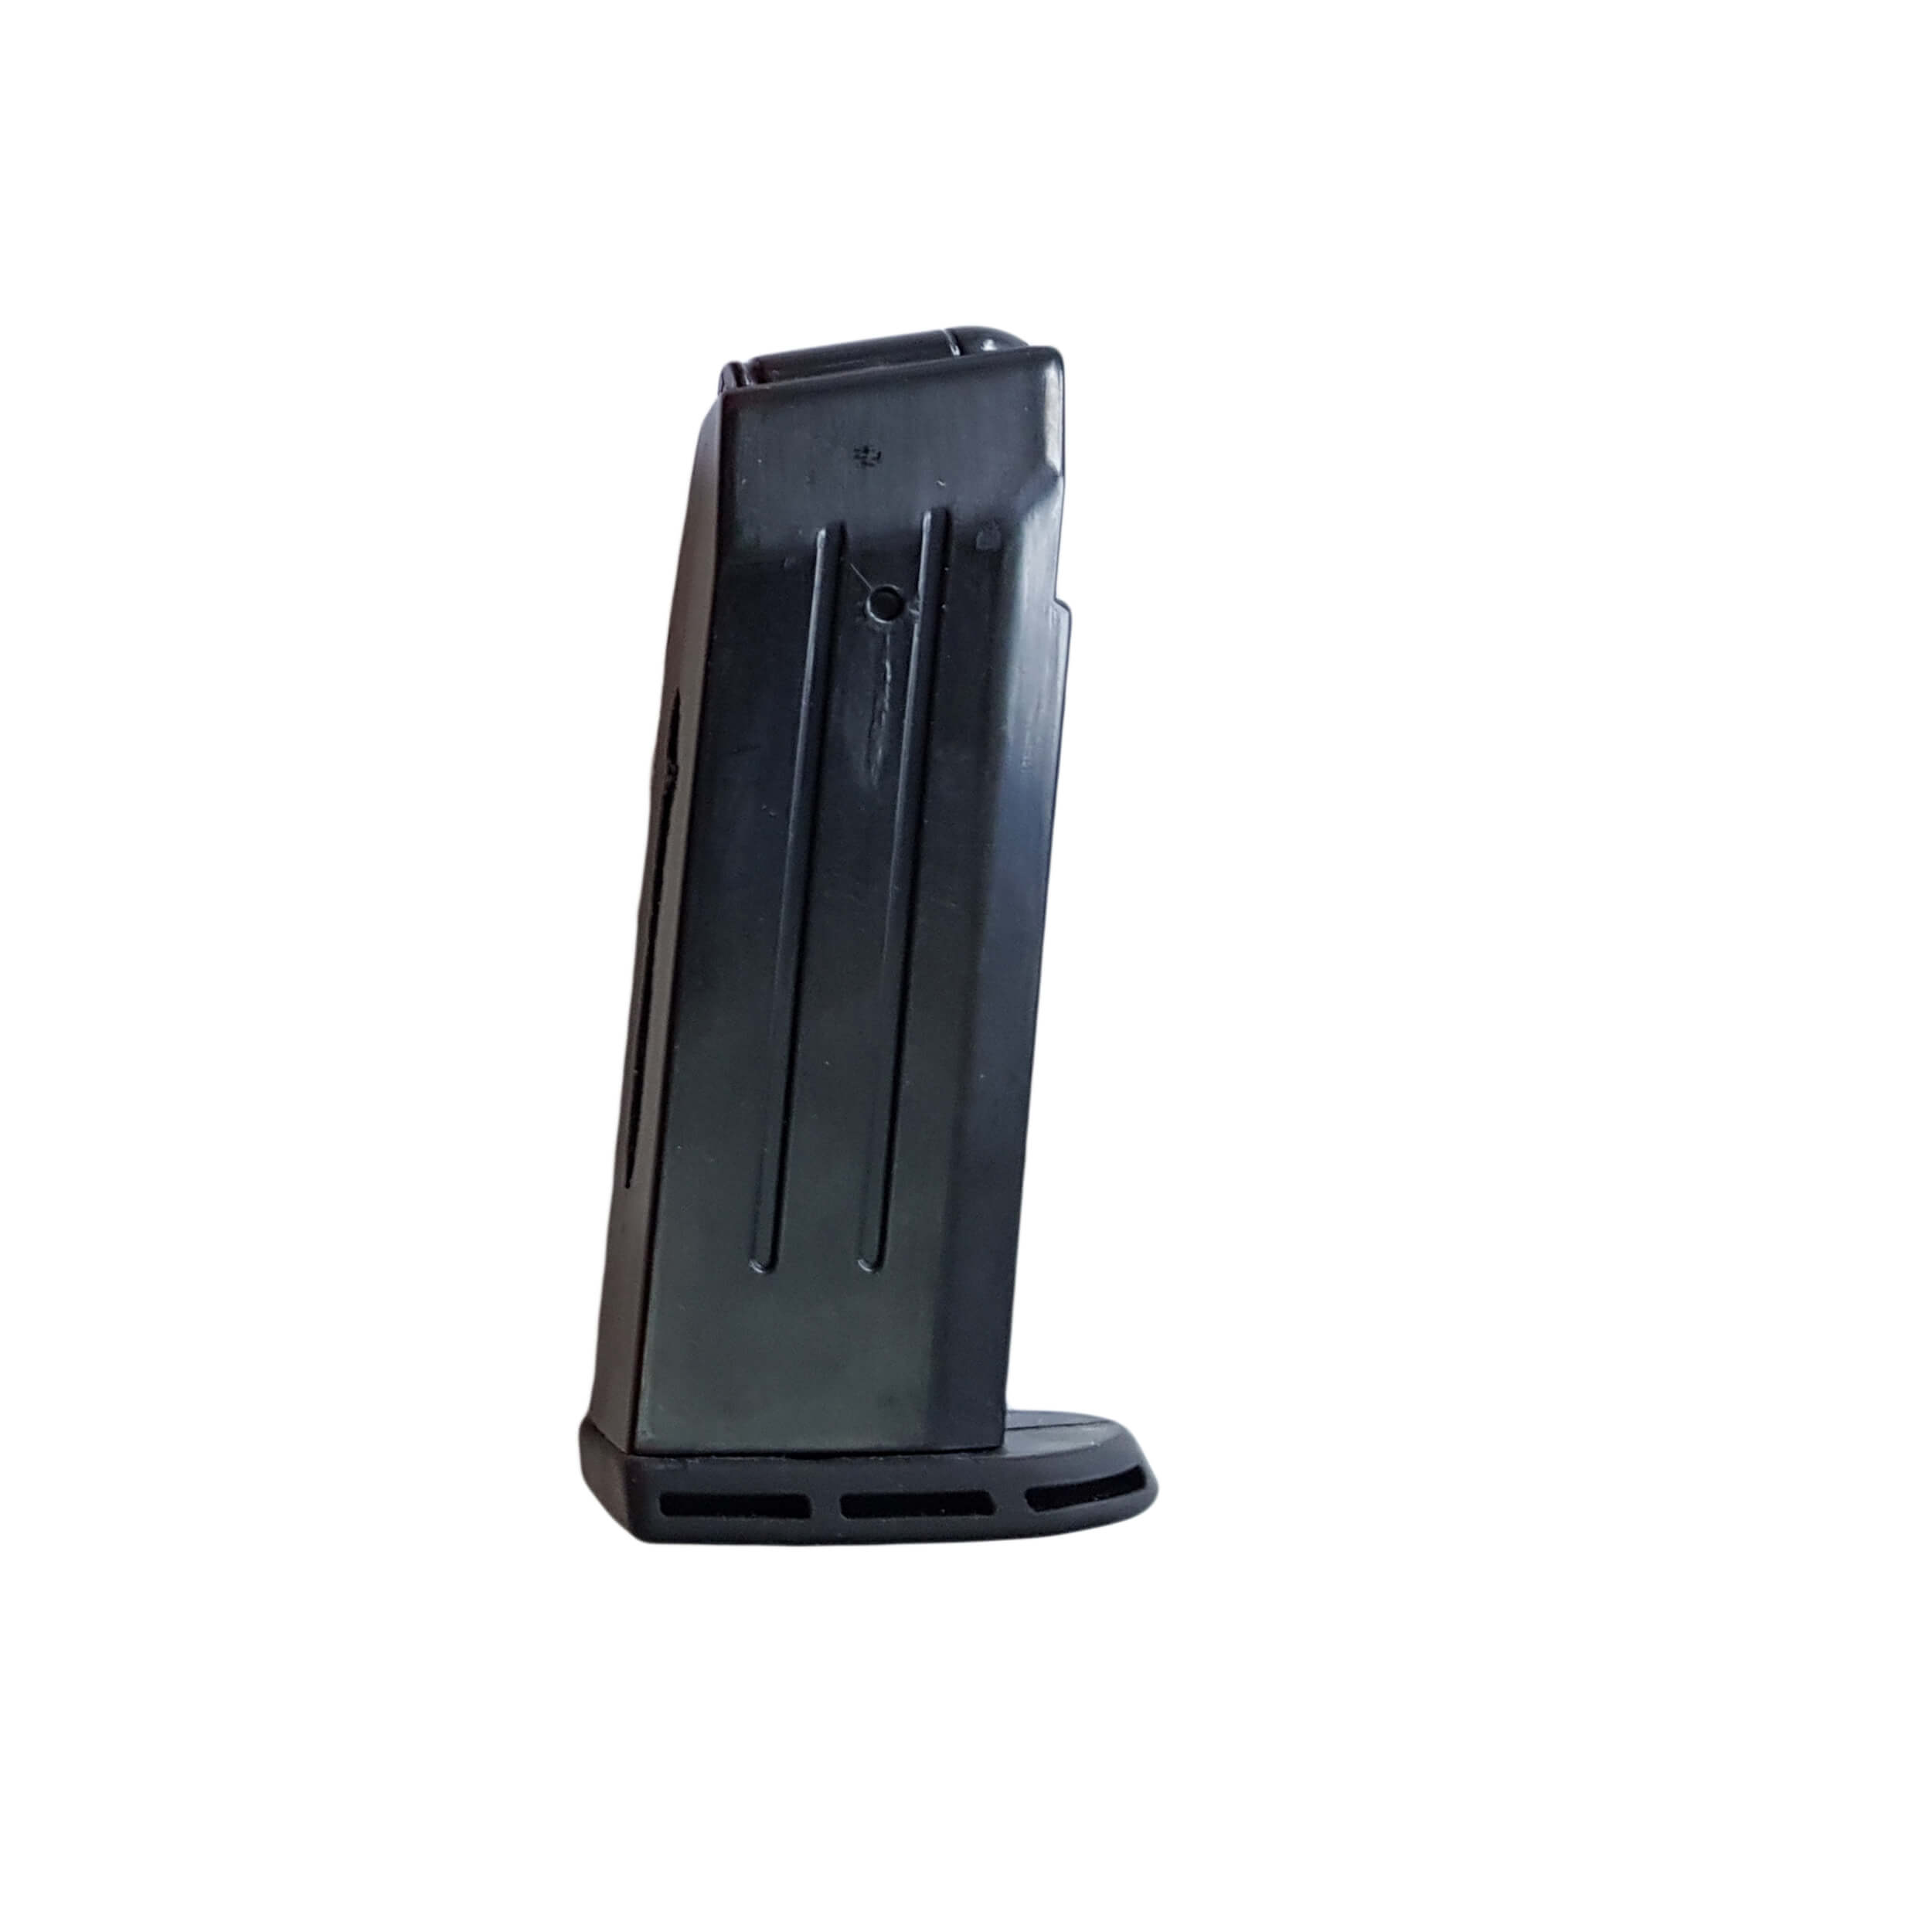 SF25-MAG Replacement Magazine for Pro Laser Training Pistol